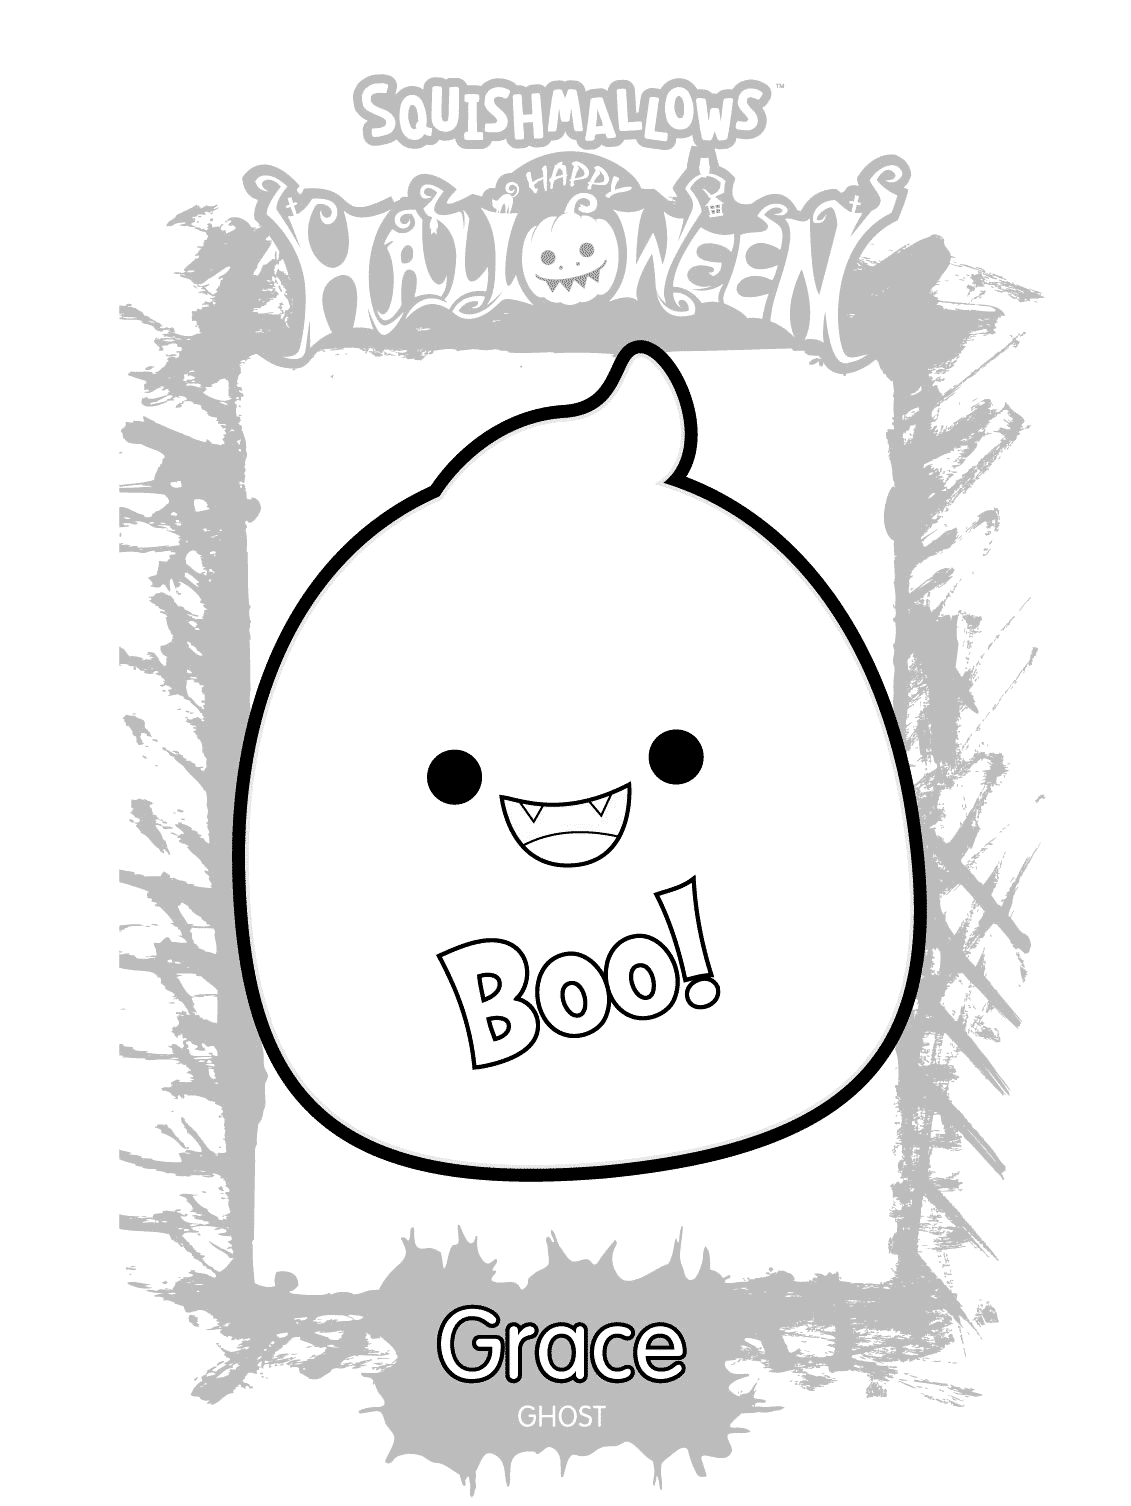 Halloween Squishmallows Ghost Grace